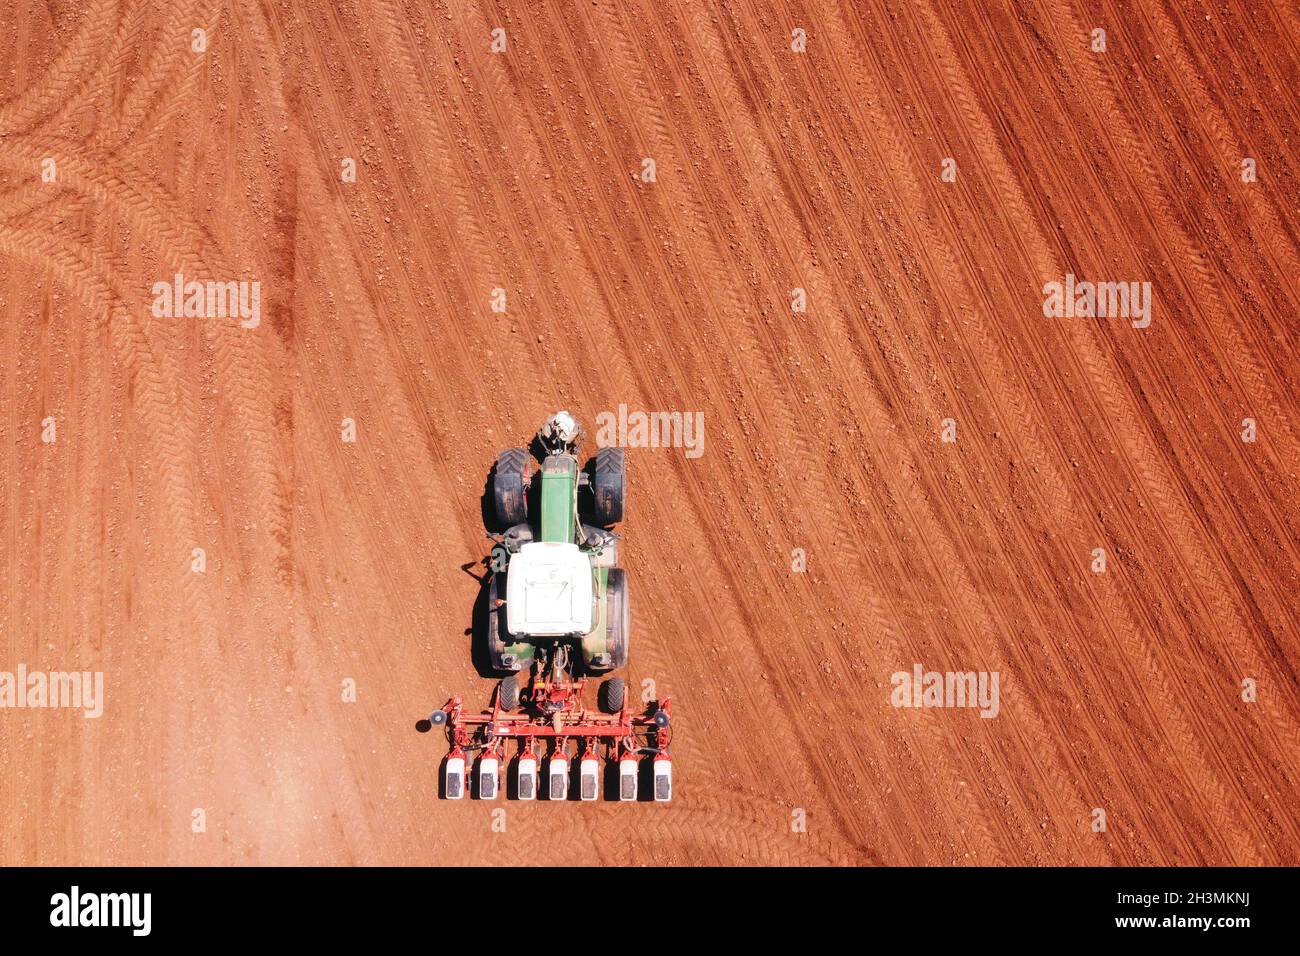 Farmer seeding, sowing crops at field with tractor. Sowing is the process of planting seeds in the ground as part of agricultura Stock Photo